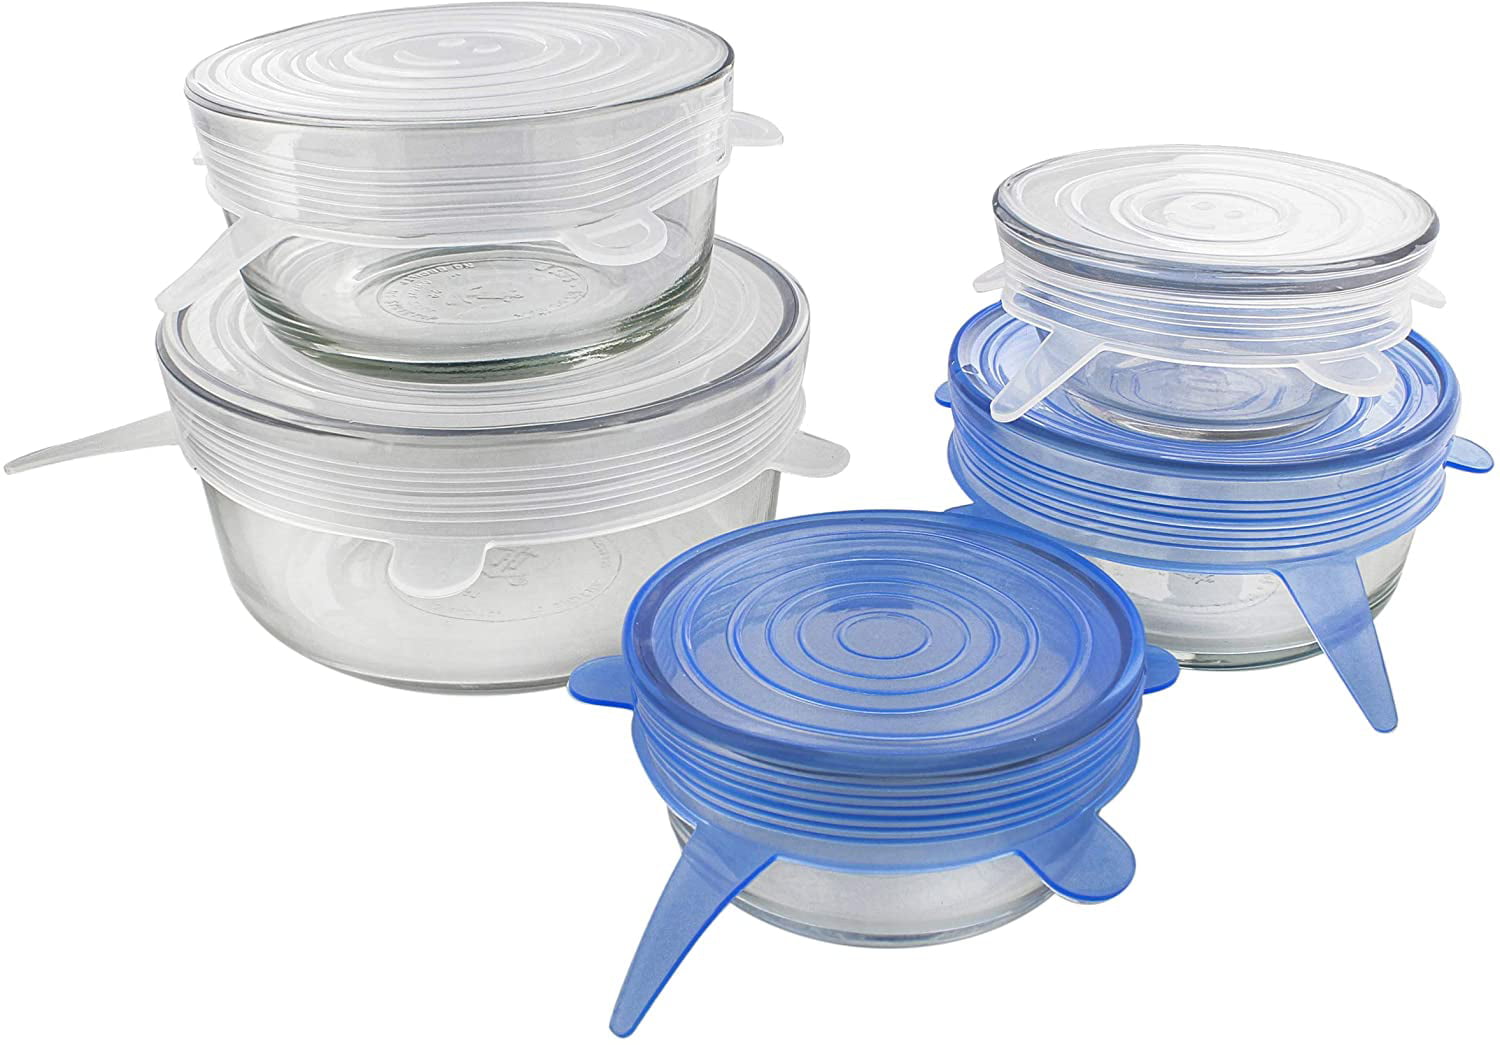 Silicone Bowl Lids Blue Set of 5 Reusable Suction Seal Covers for Bowls,  Pots, Cups. Food Safe. Natural grip, interlocking handles for easy use and